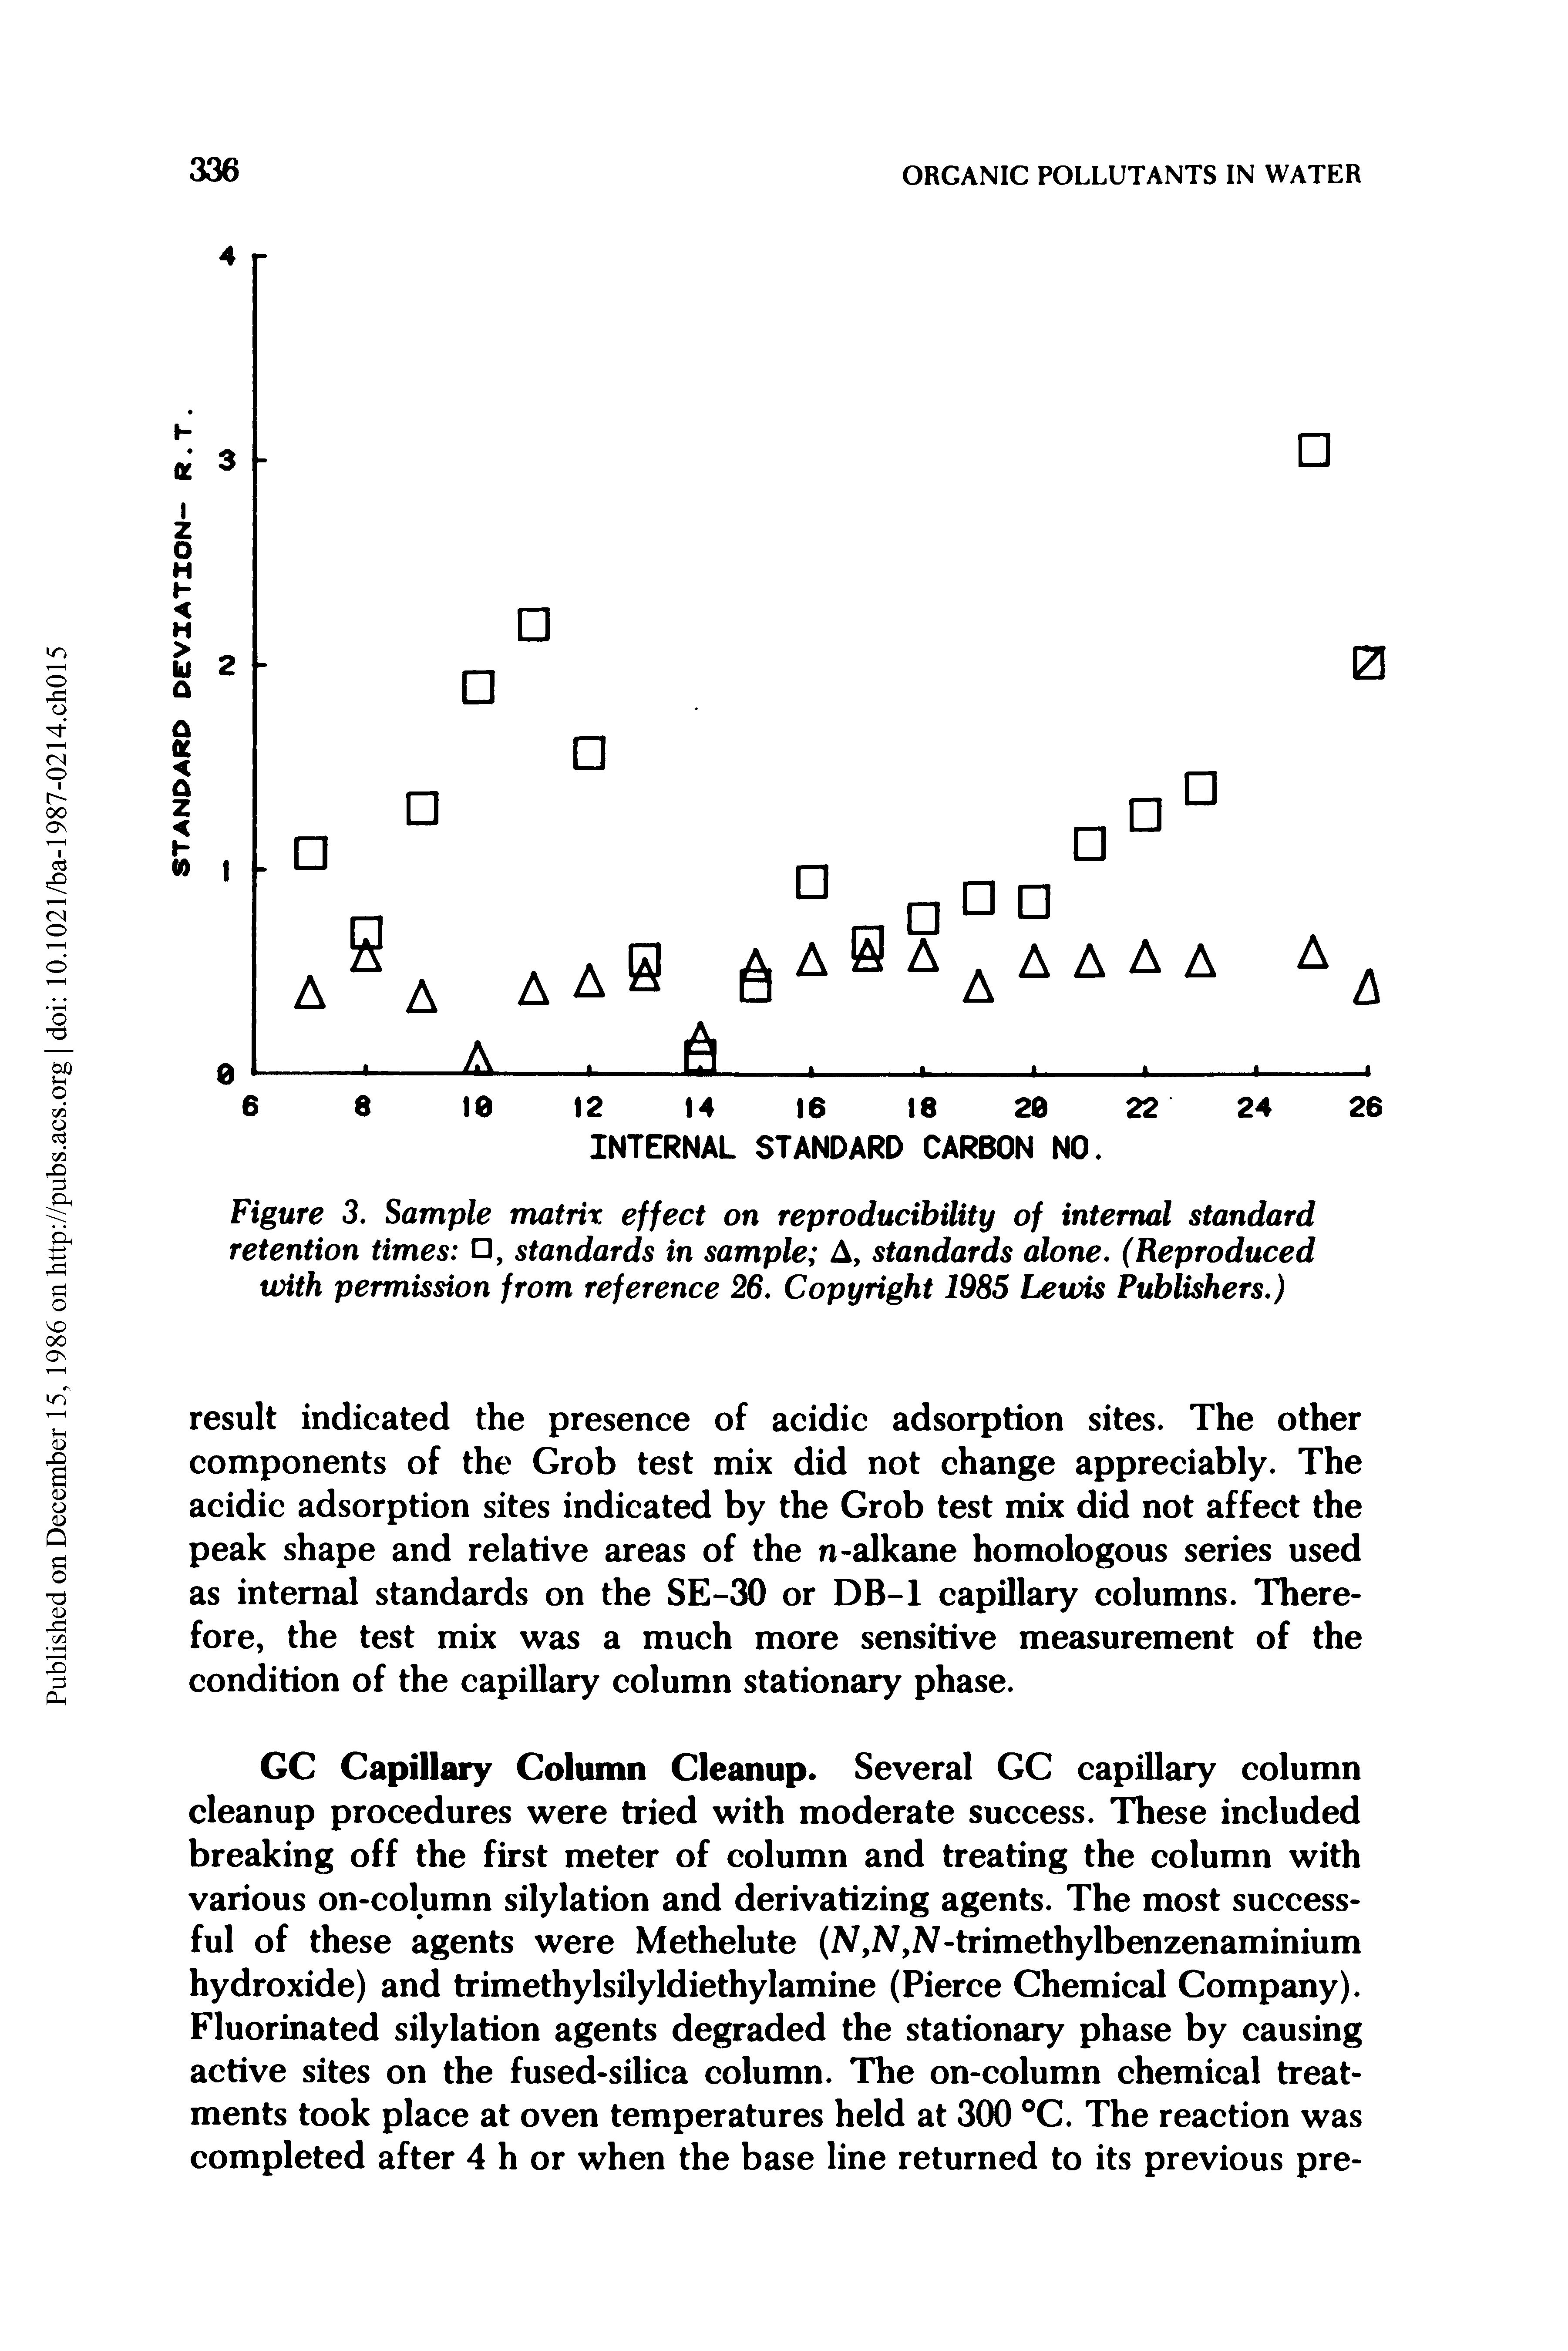 Figure 3. Sample matrix effect on reproducibility of internal standard retention times , standards in sample A, standards alone. (Reproduced with permission from reference 26. Copyright 1985 Lewis Publishers.)...